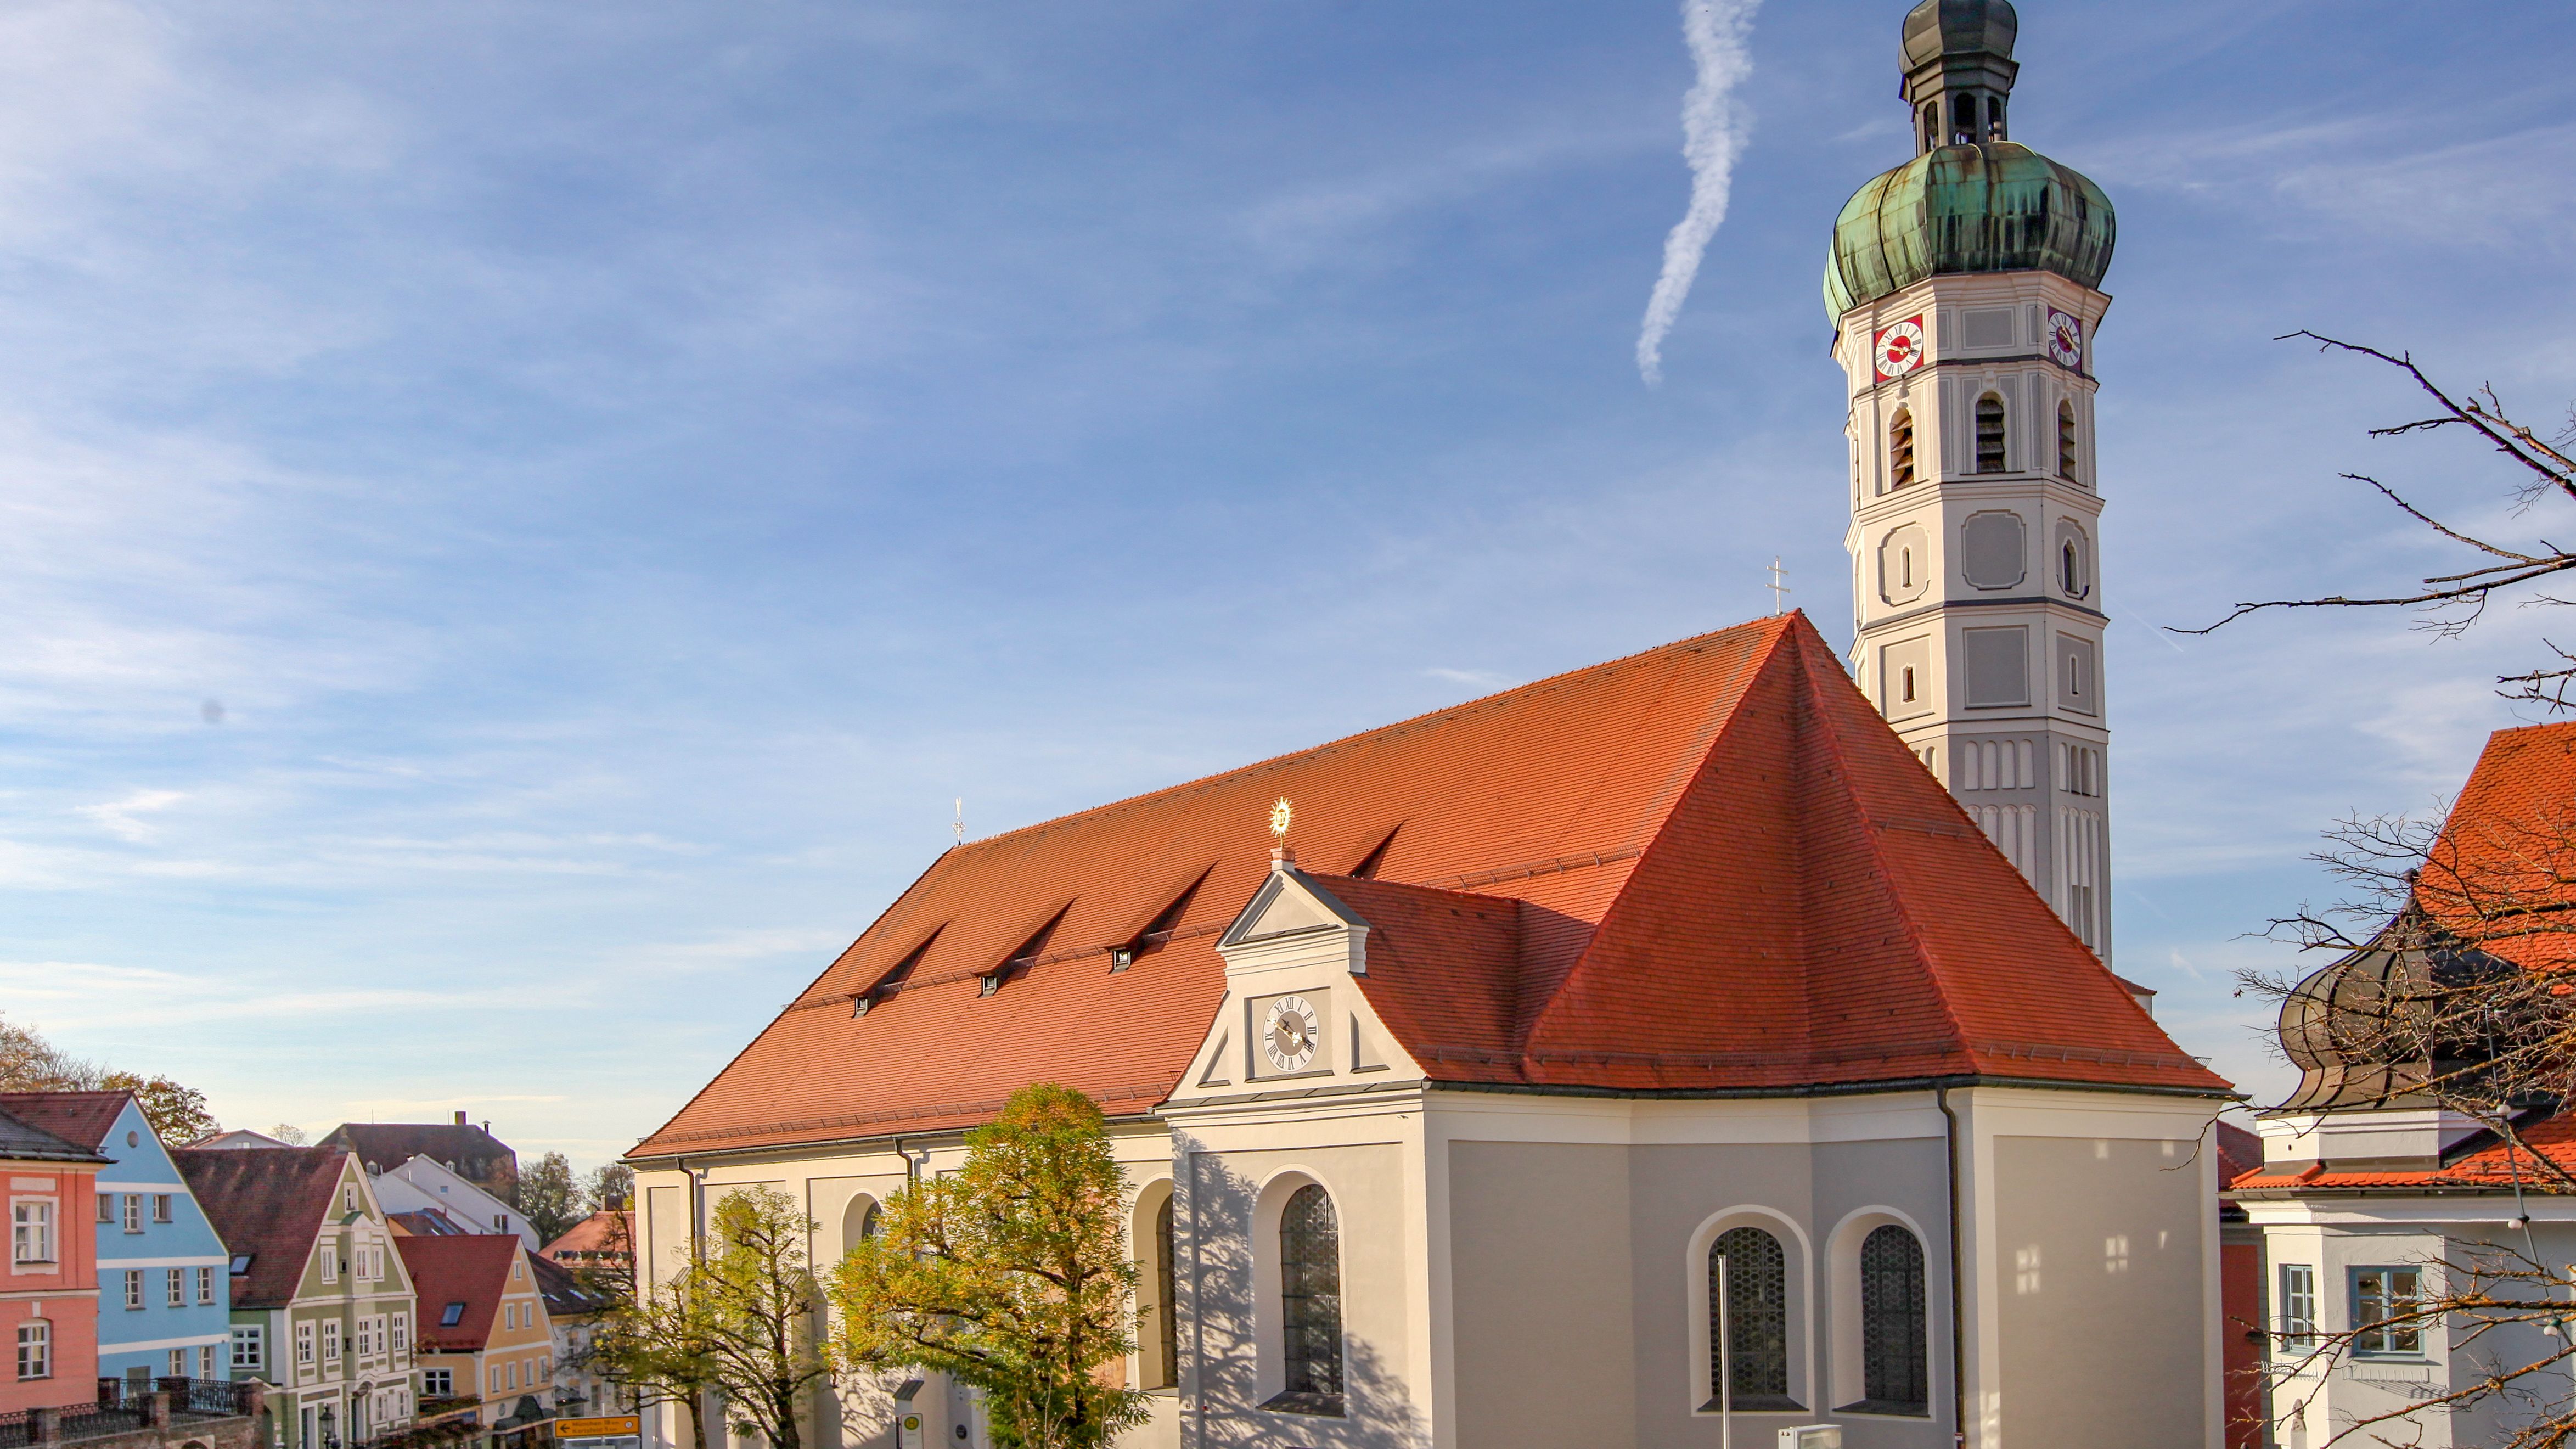 Photo of parish church St. Jakob in Dachau old town in spring with blue sky overhead. Photo: City of Dachau